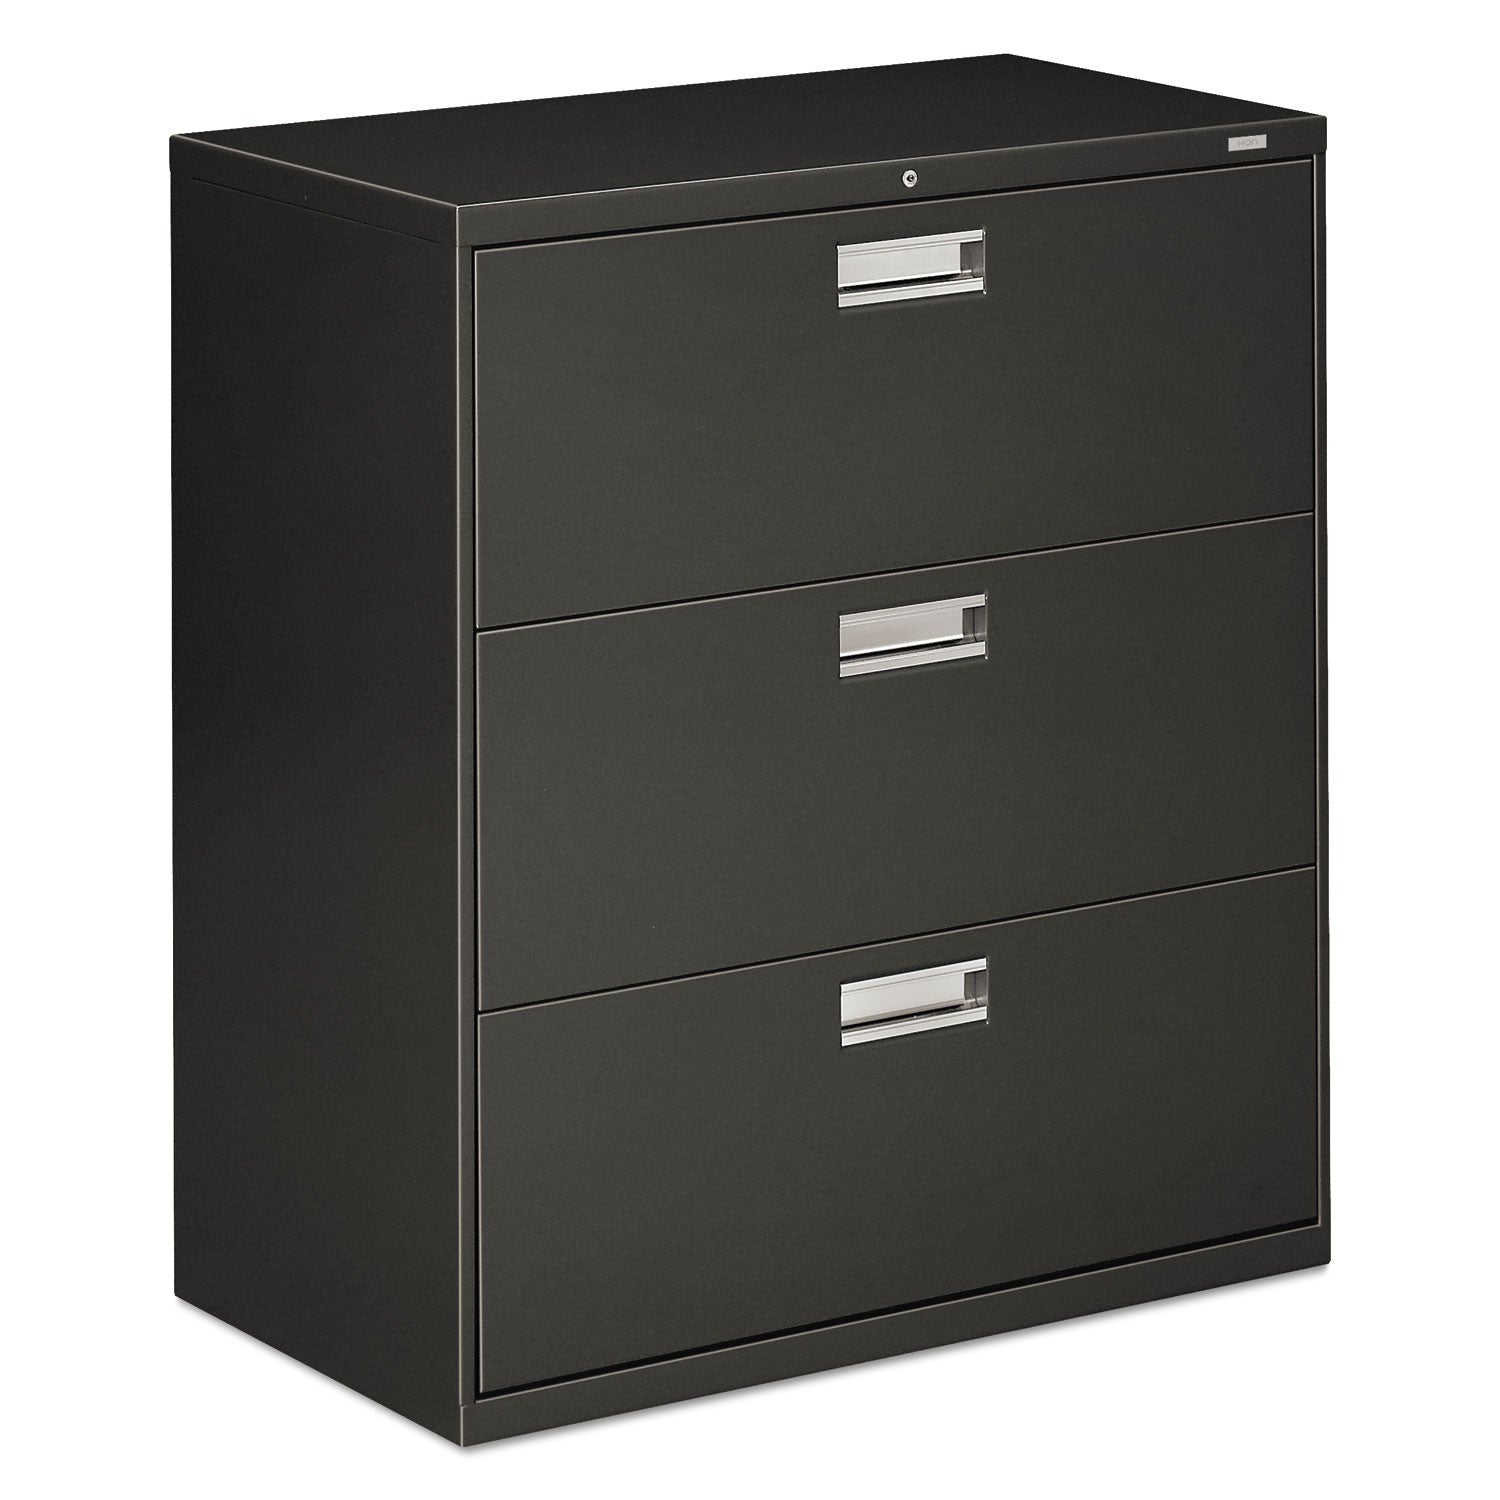 Brigade 600 Series Lateral File, 3 Legal/Letter-Size File Drawers, Charcoal, 36" x 18" x 39.13 - 